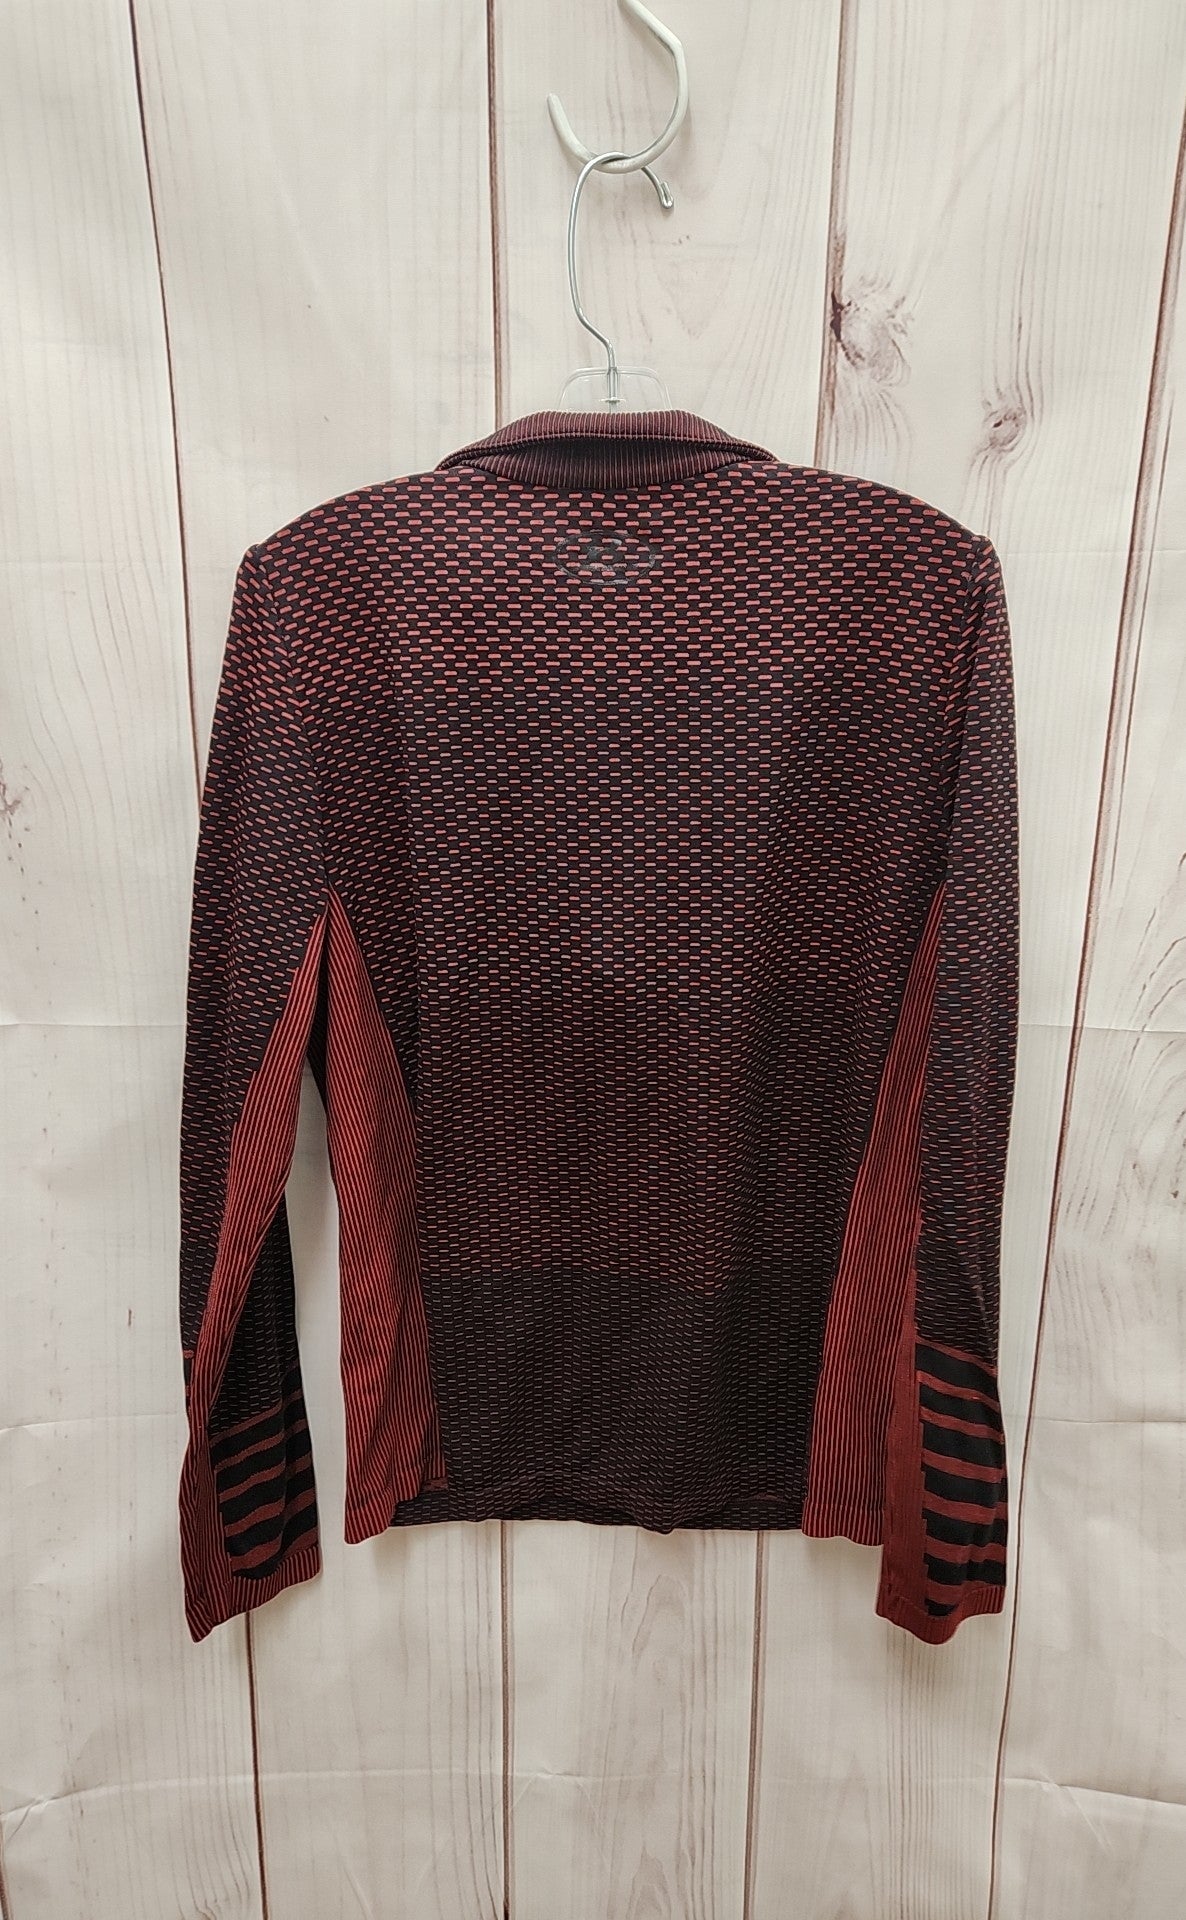 Under Armour Boy's Size 10/12 Black & Red Shirt